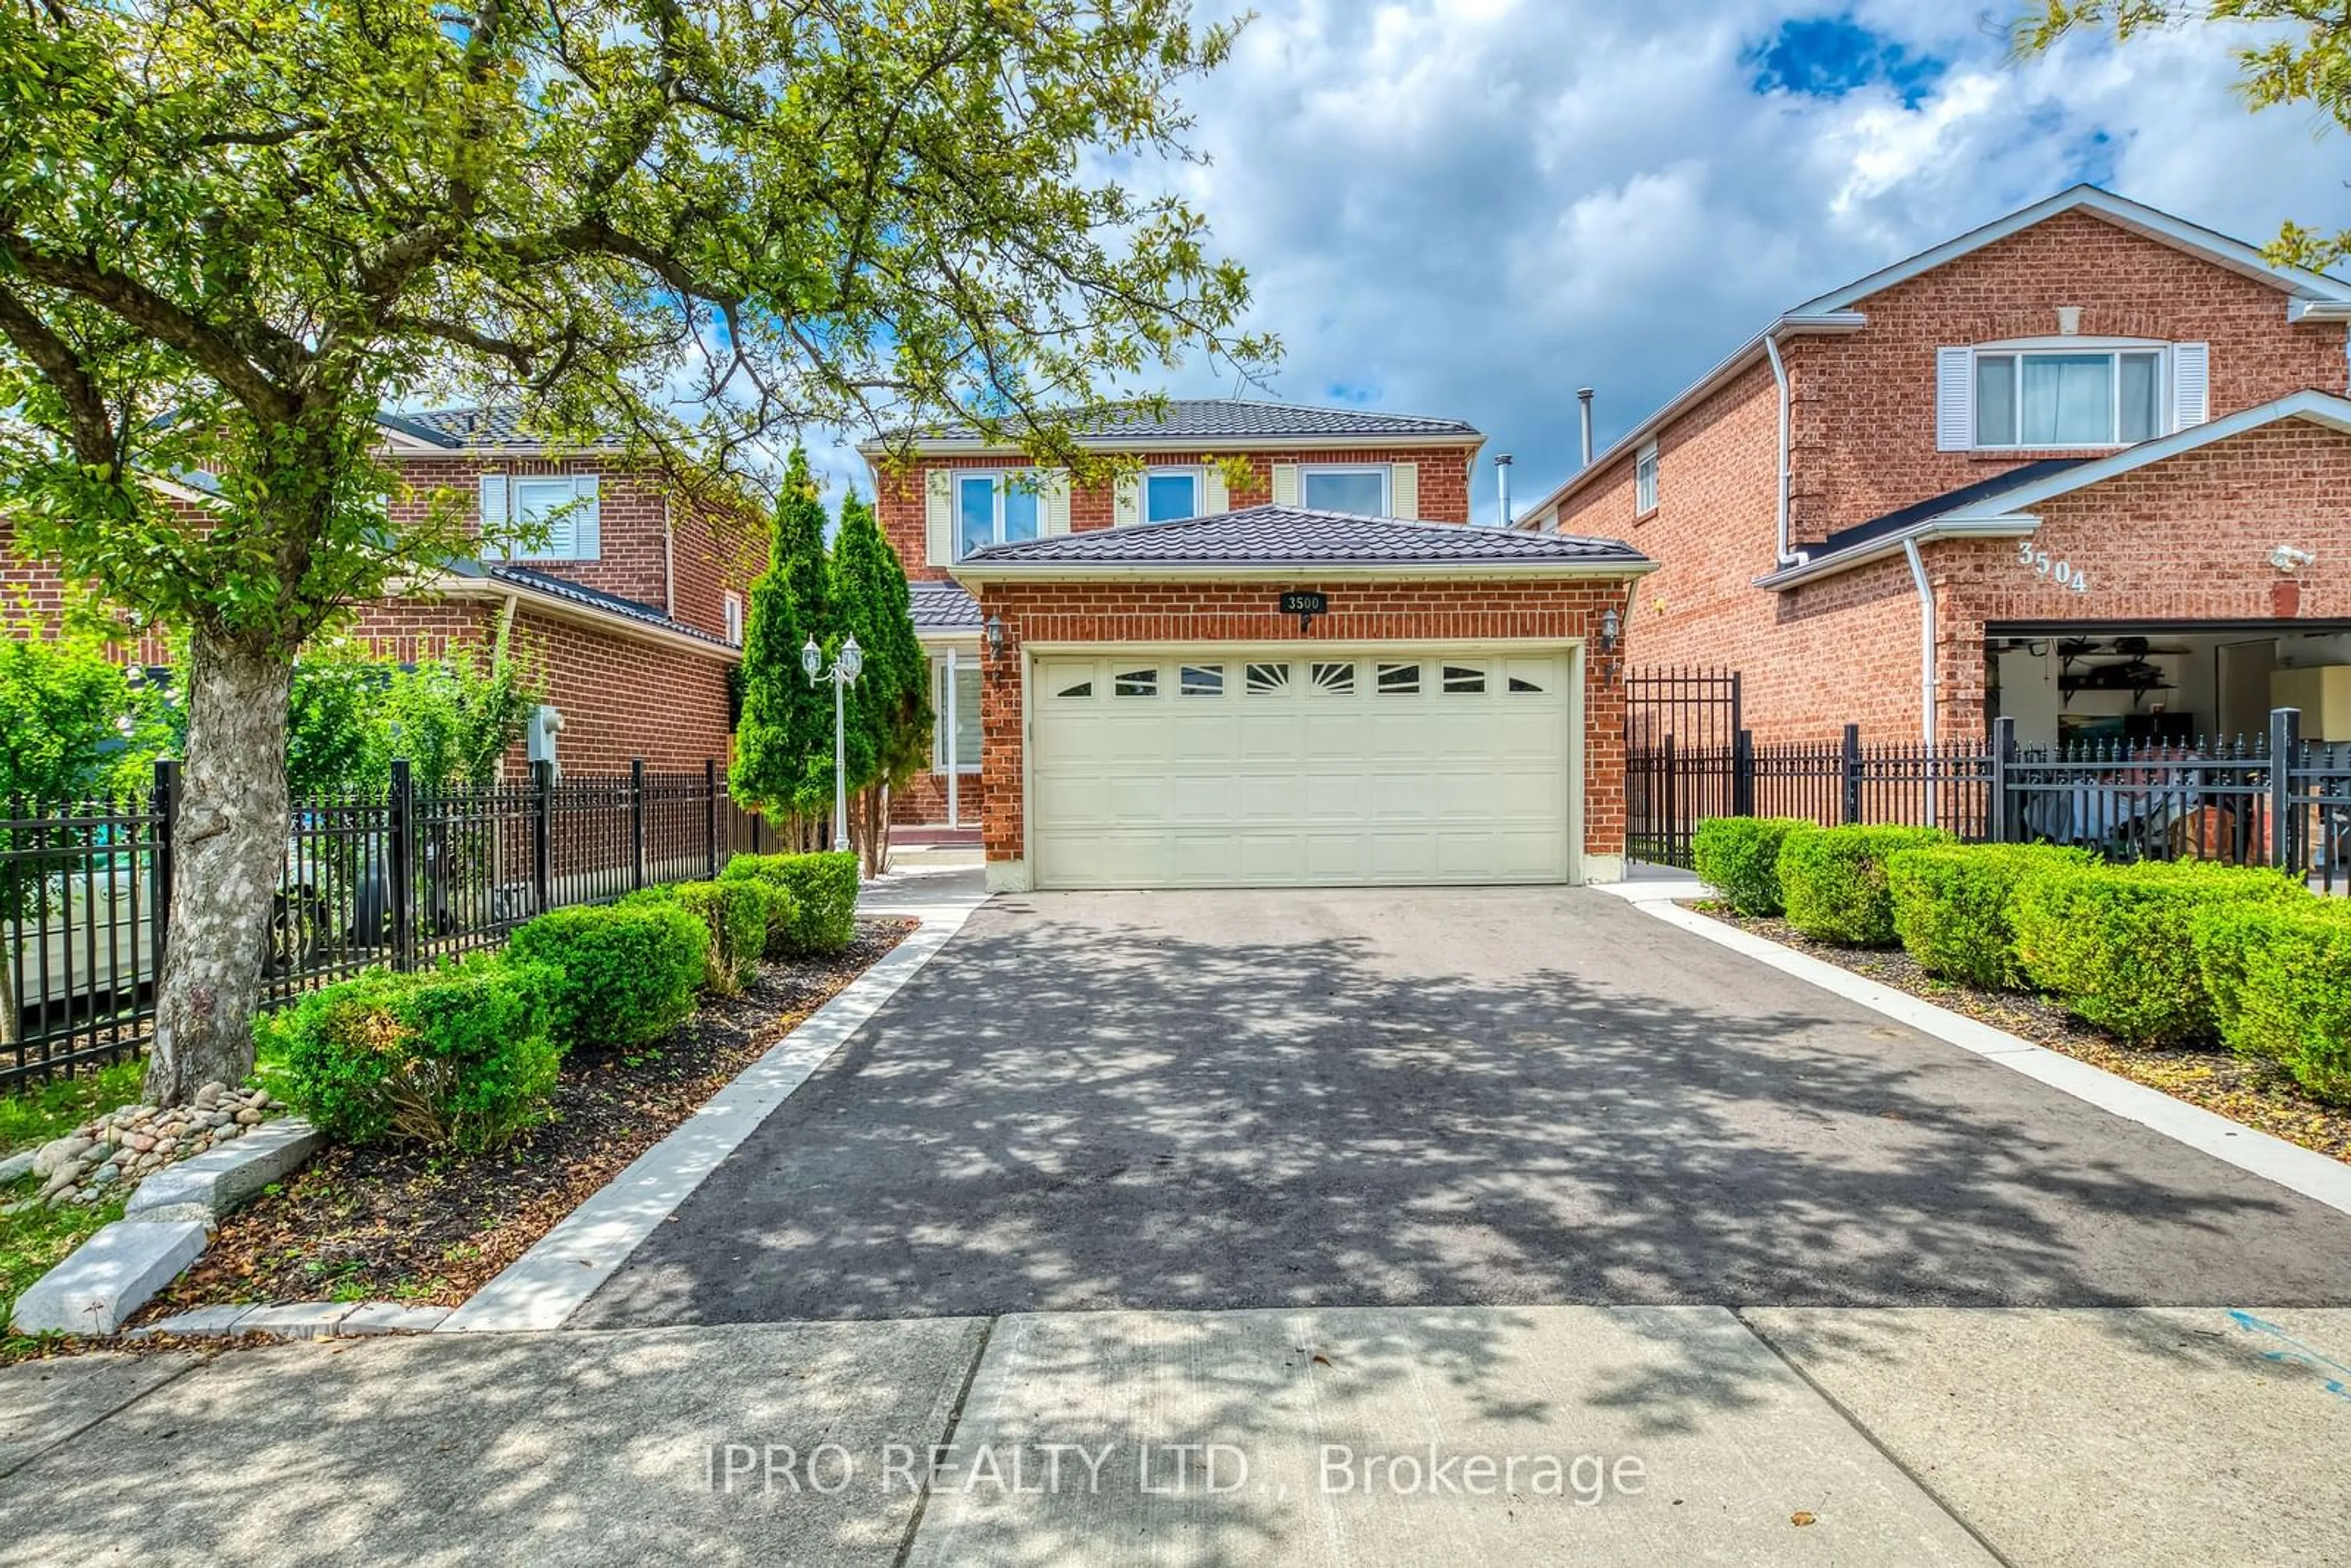 Home with brick exterior material for 3500 Croatia Dr, Mississauga Ontario L5B 3K9